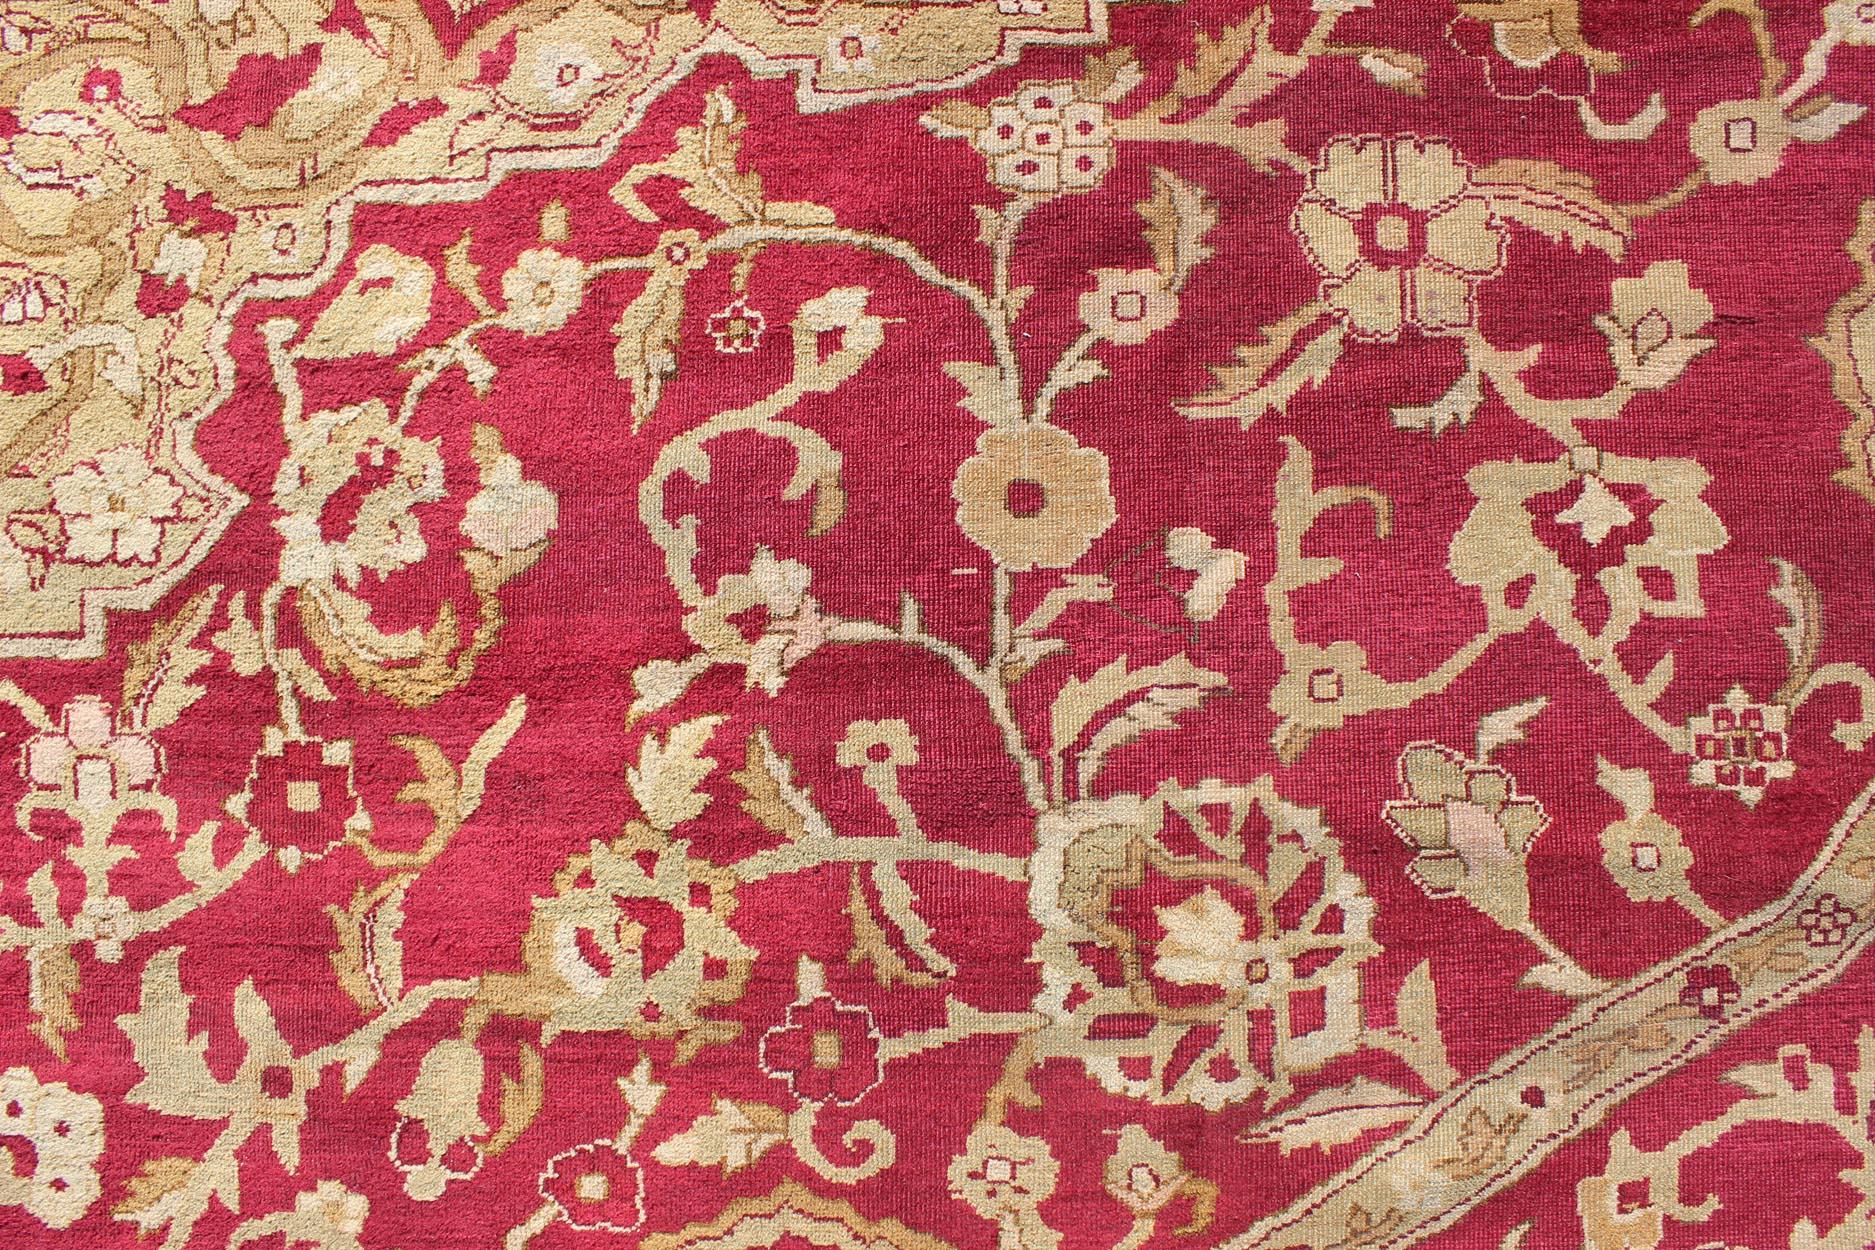 Large Antique Agra Carpet with Floral Design in Red, Taupe and Light Green  3